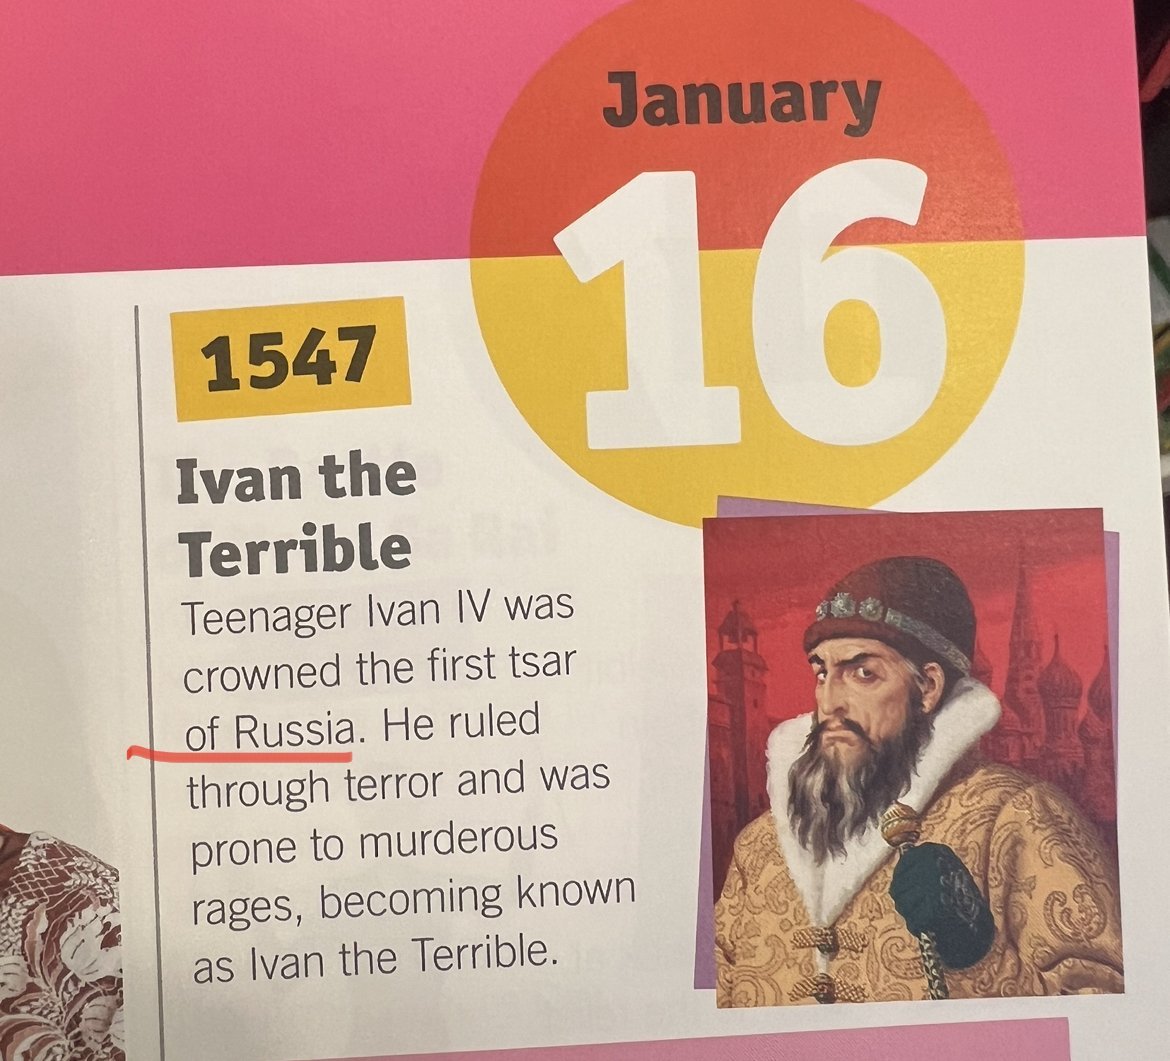 On this day. A history of the world in 366 days, Dorling Kindersley, 2021. Similarly to Peter I, Ivan IV has never been a “tsar of Russia”, but a tsar of Muscovy